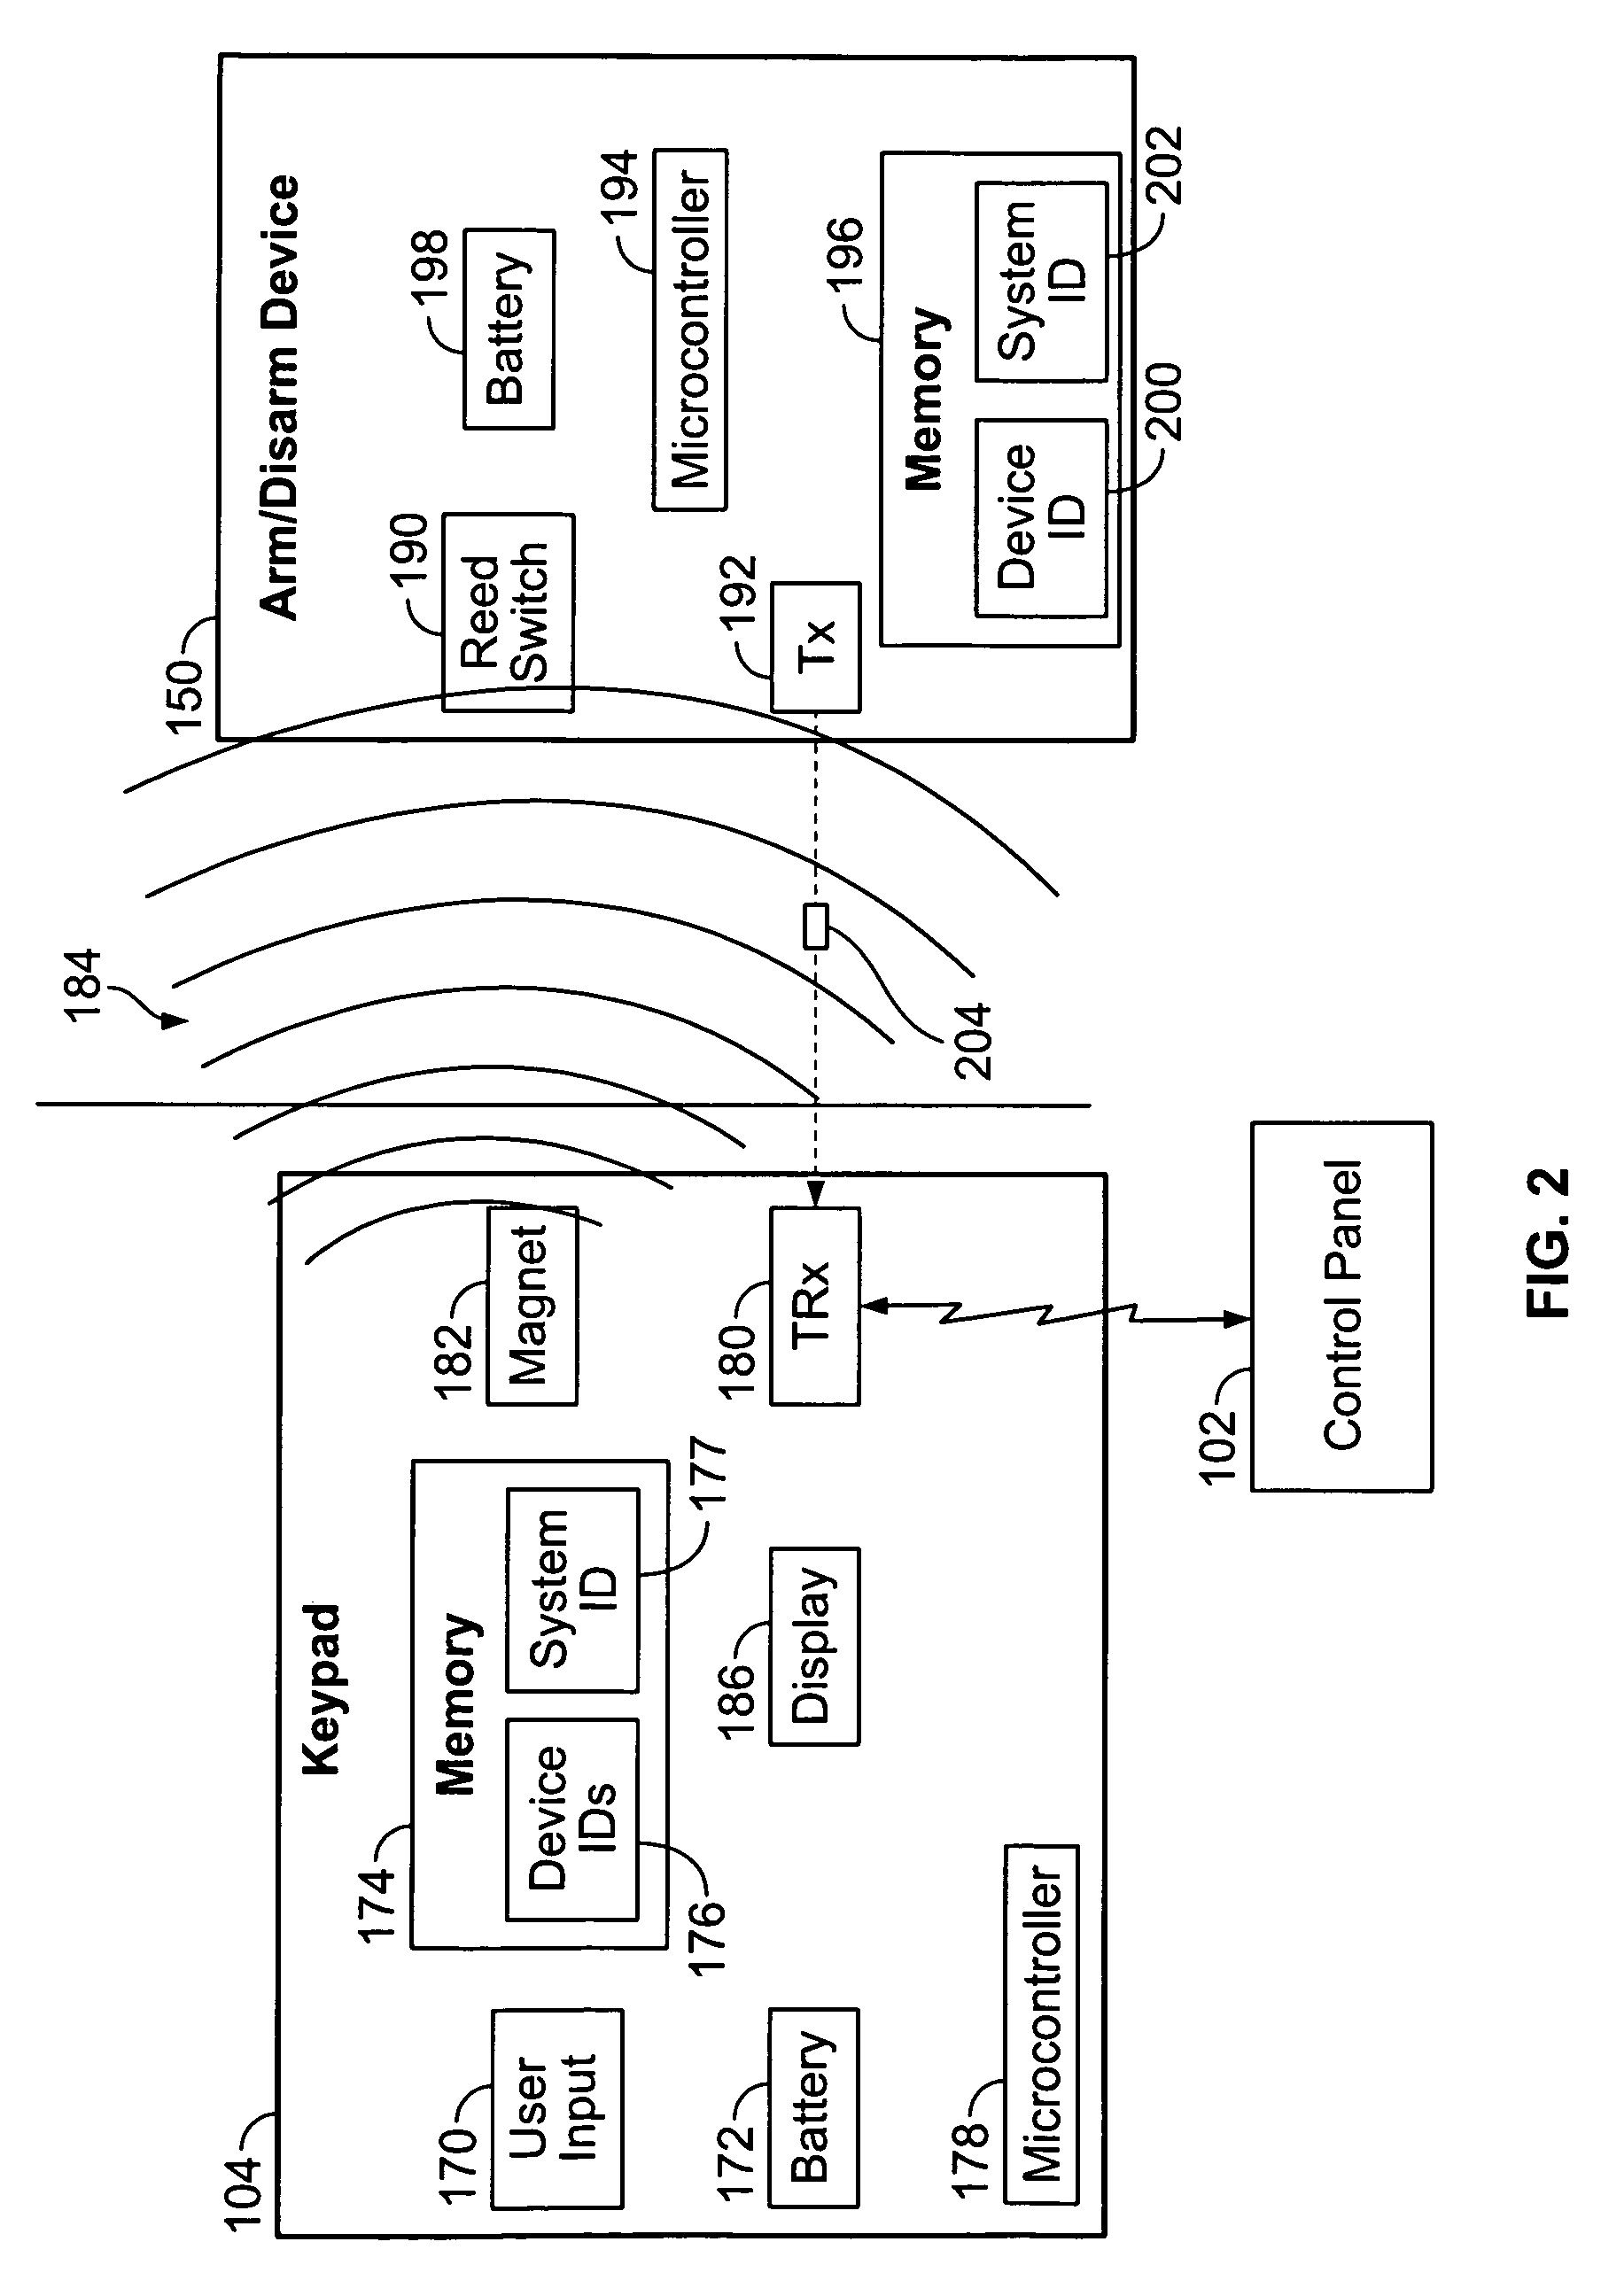 Method and apparatus for proximity activated RFID system